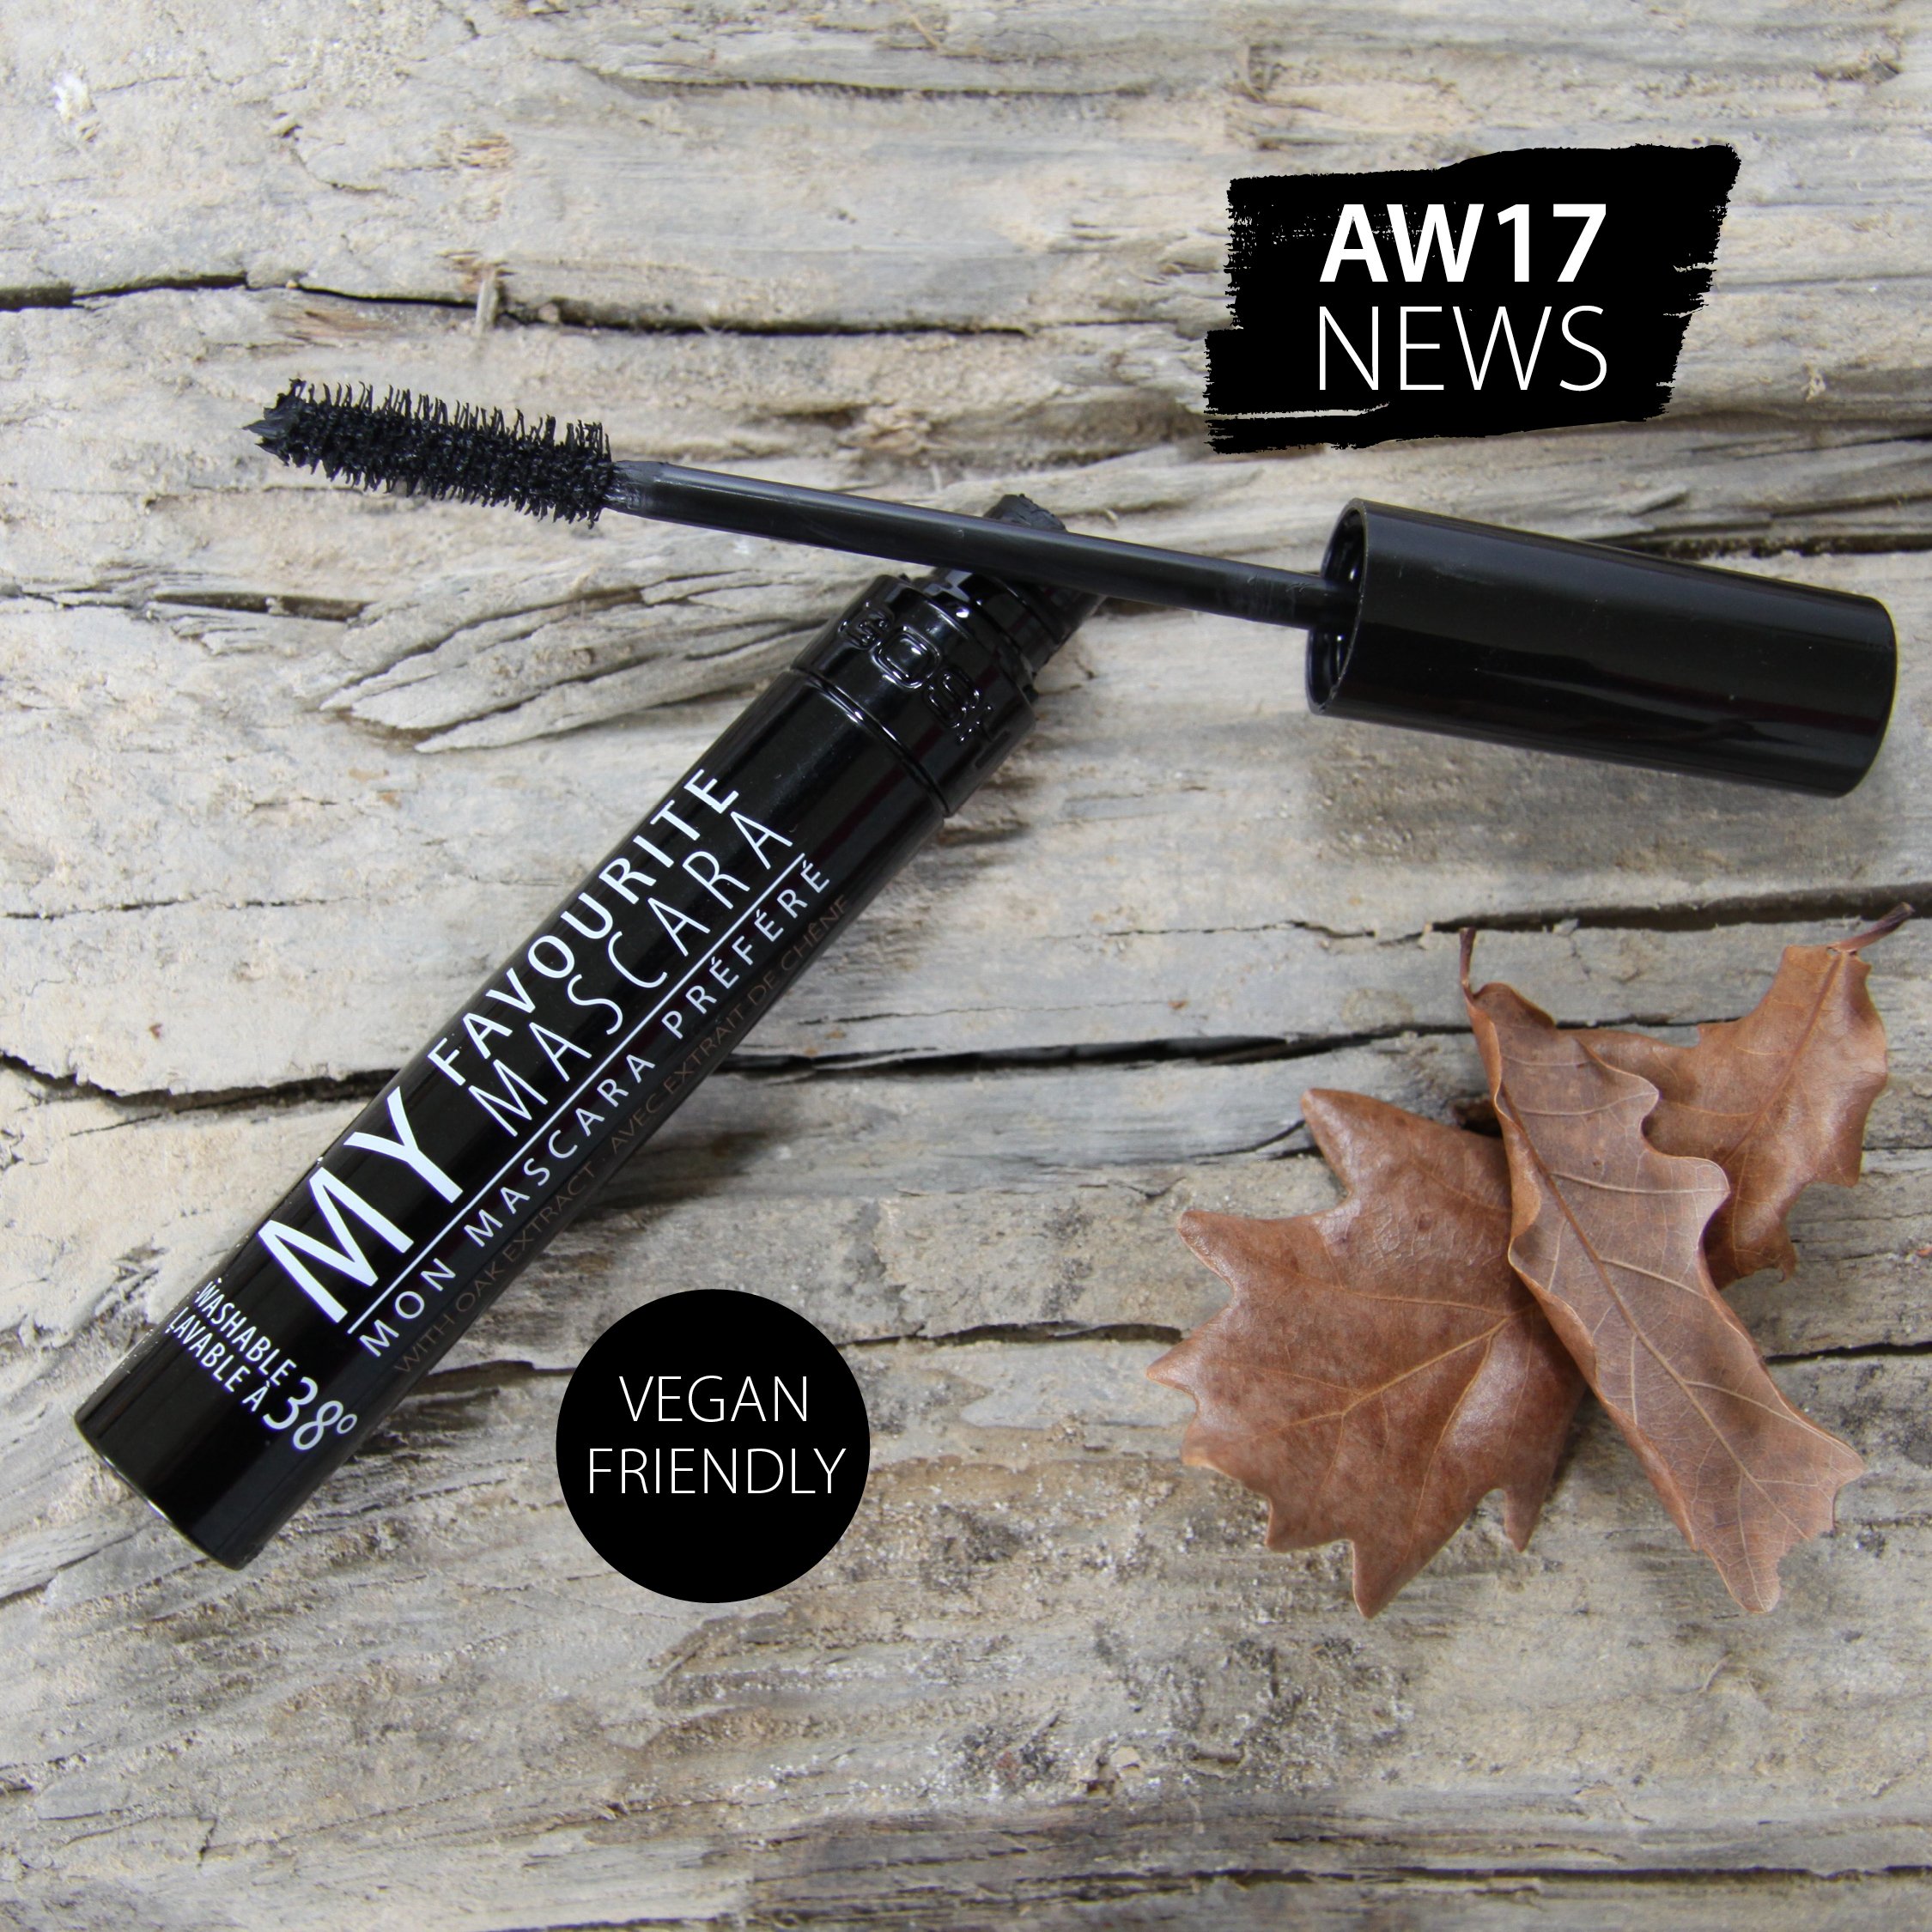 Fristelse pinion Dele BinSina.ae on Twitter: "The new "My Favorite Mascara" will become  everyone's favorite mascara. It can be easily removed with 38 degree water.  Who would like to try? https://t.co/t6SOSHMl6r" / Twitter